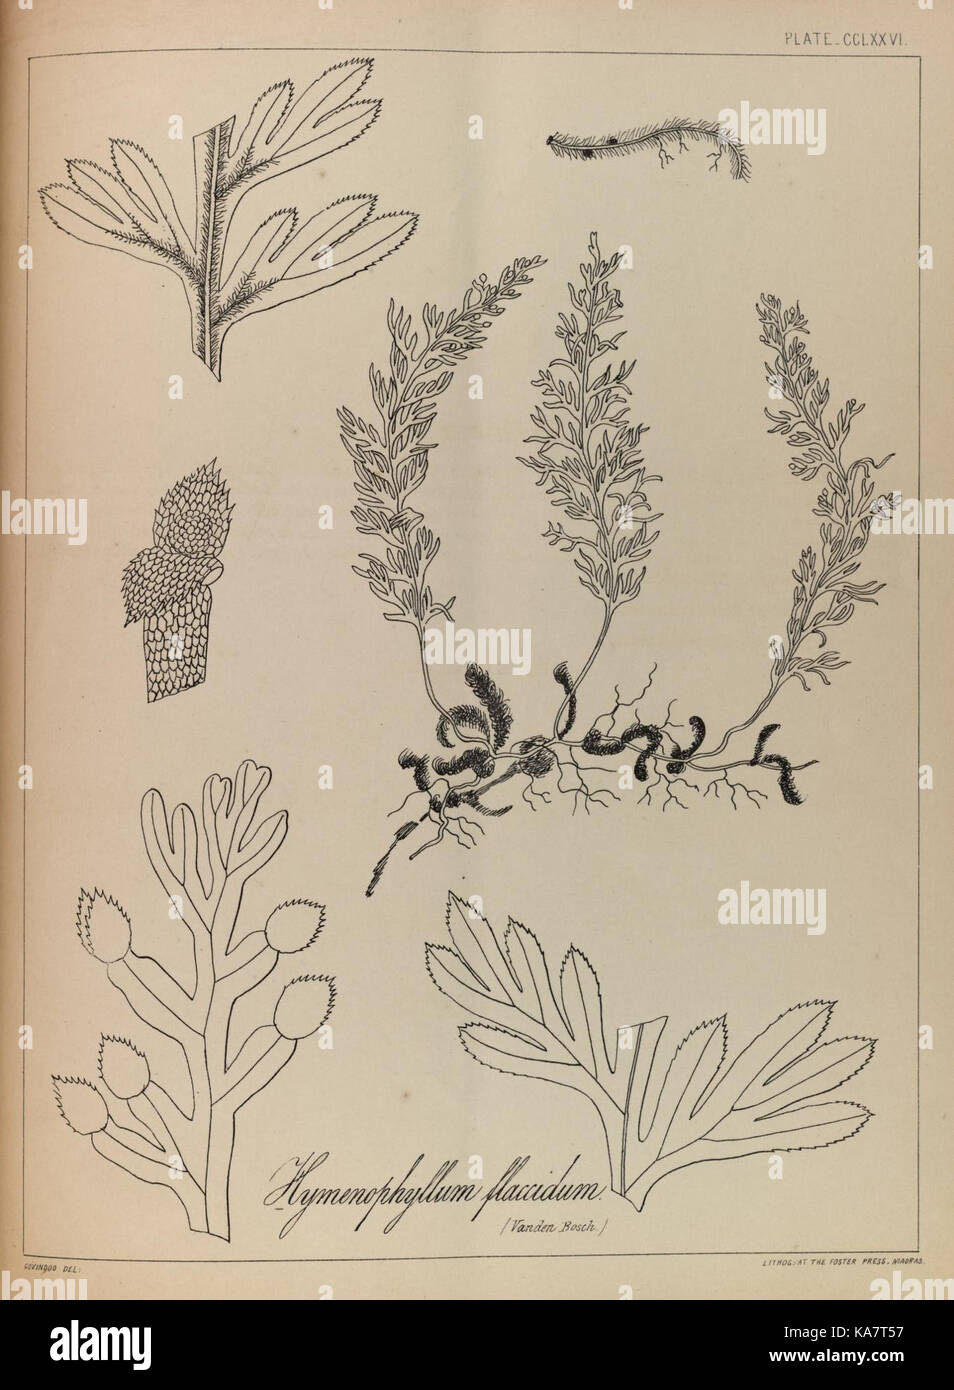 The ferns of British India (PLATE CCLXXVI) (8530438105) Stock Photo